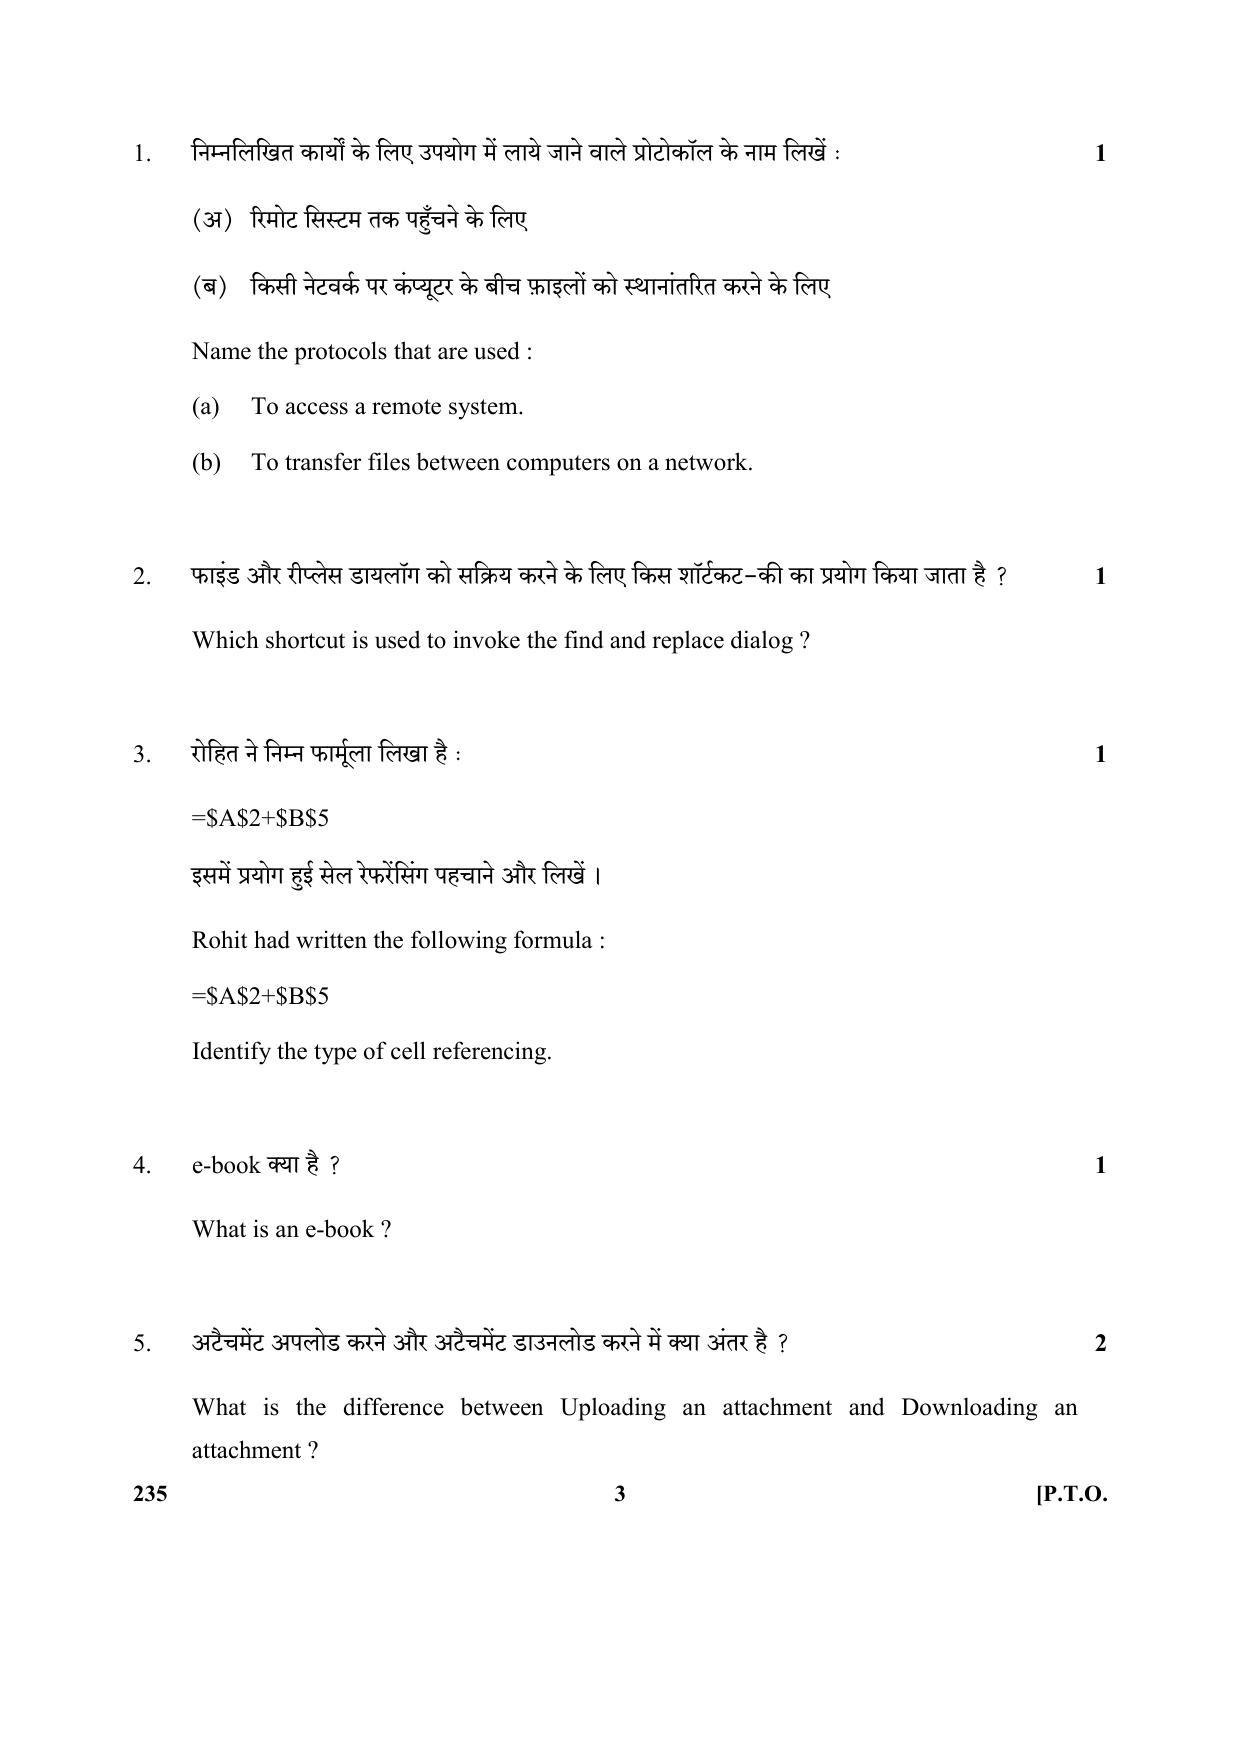 CBSE Class 10 235 Elements of Bookkeeping & Accountancy (Commerce) 2018 Question Paper - Page 3